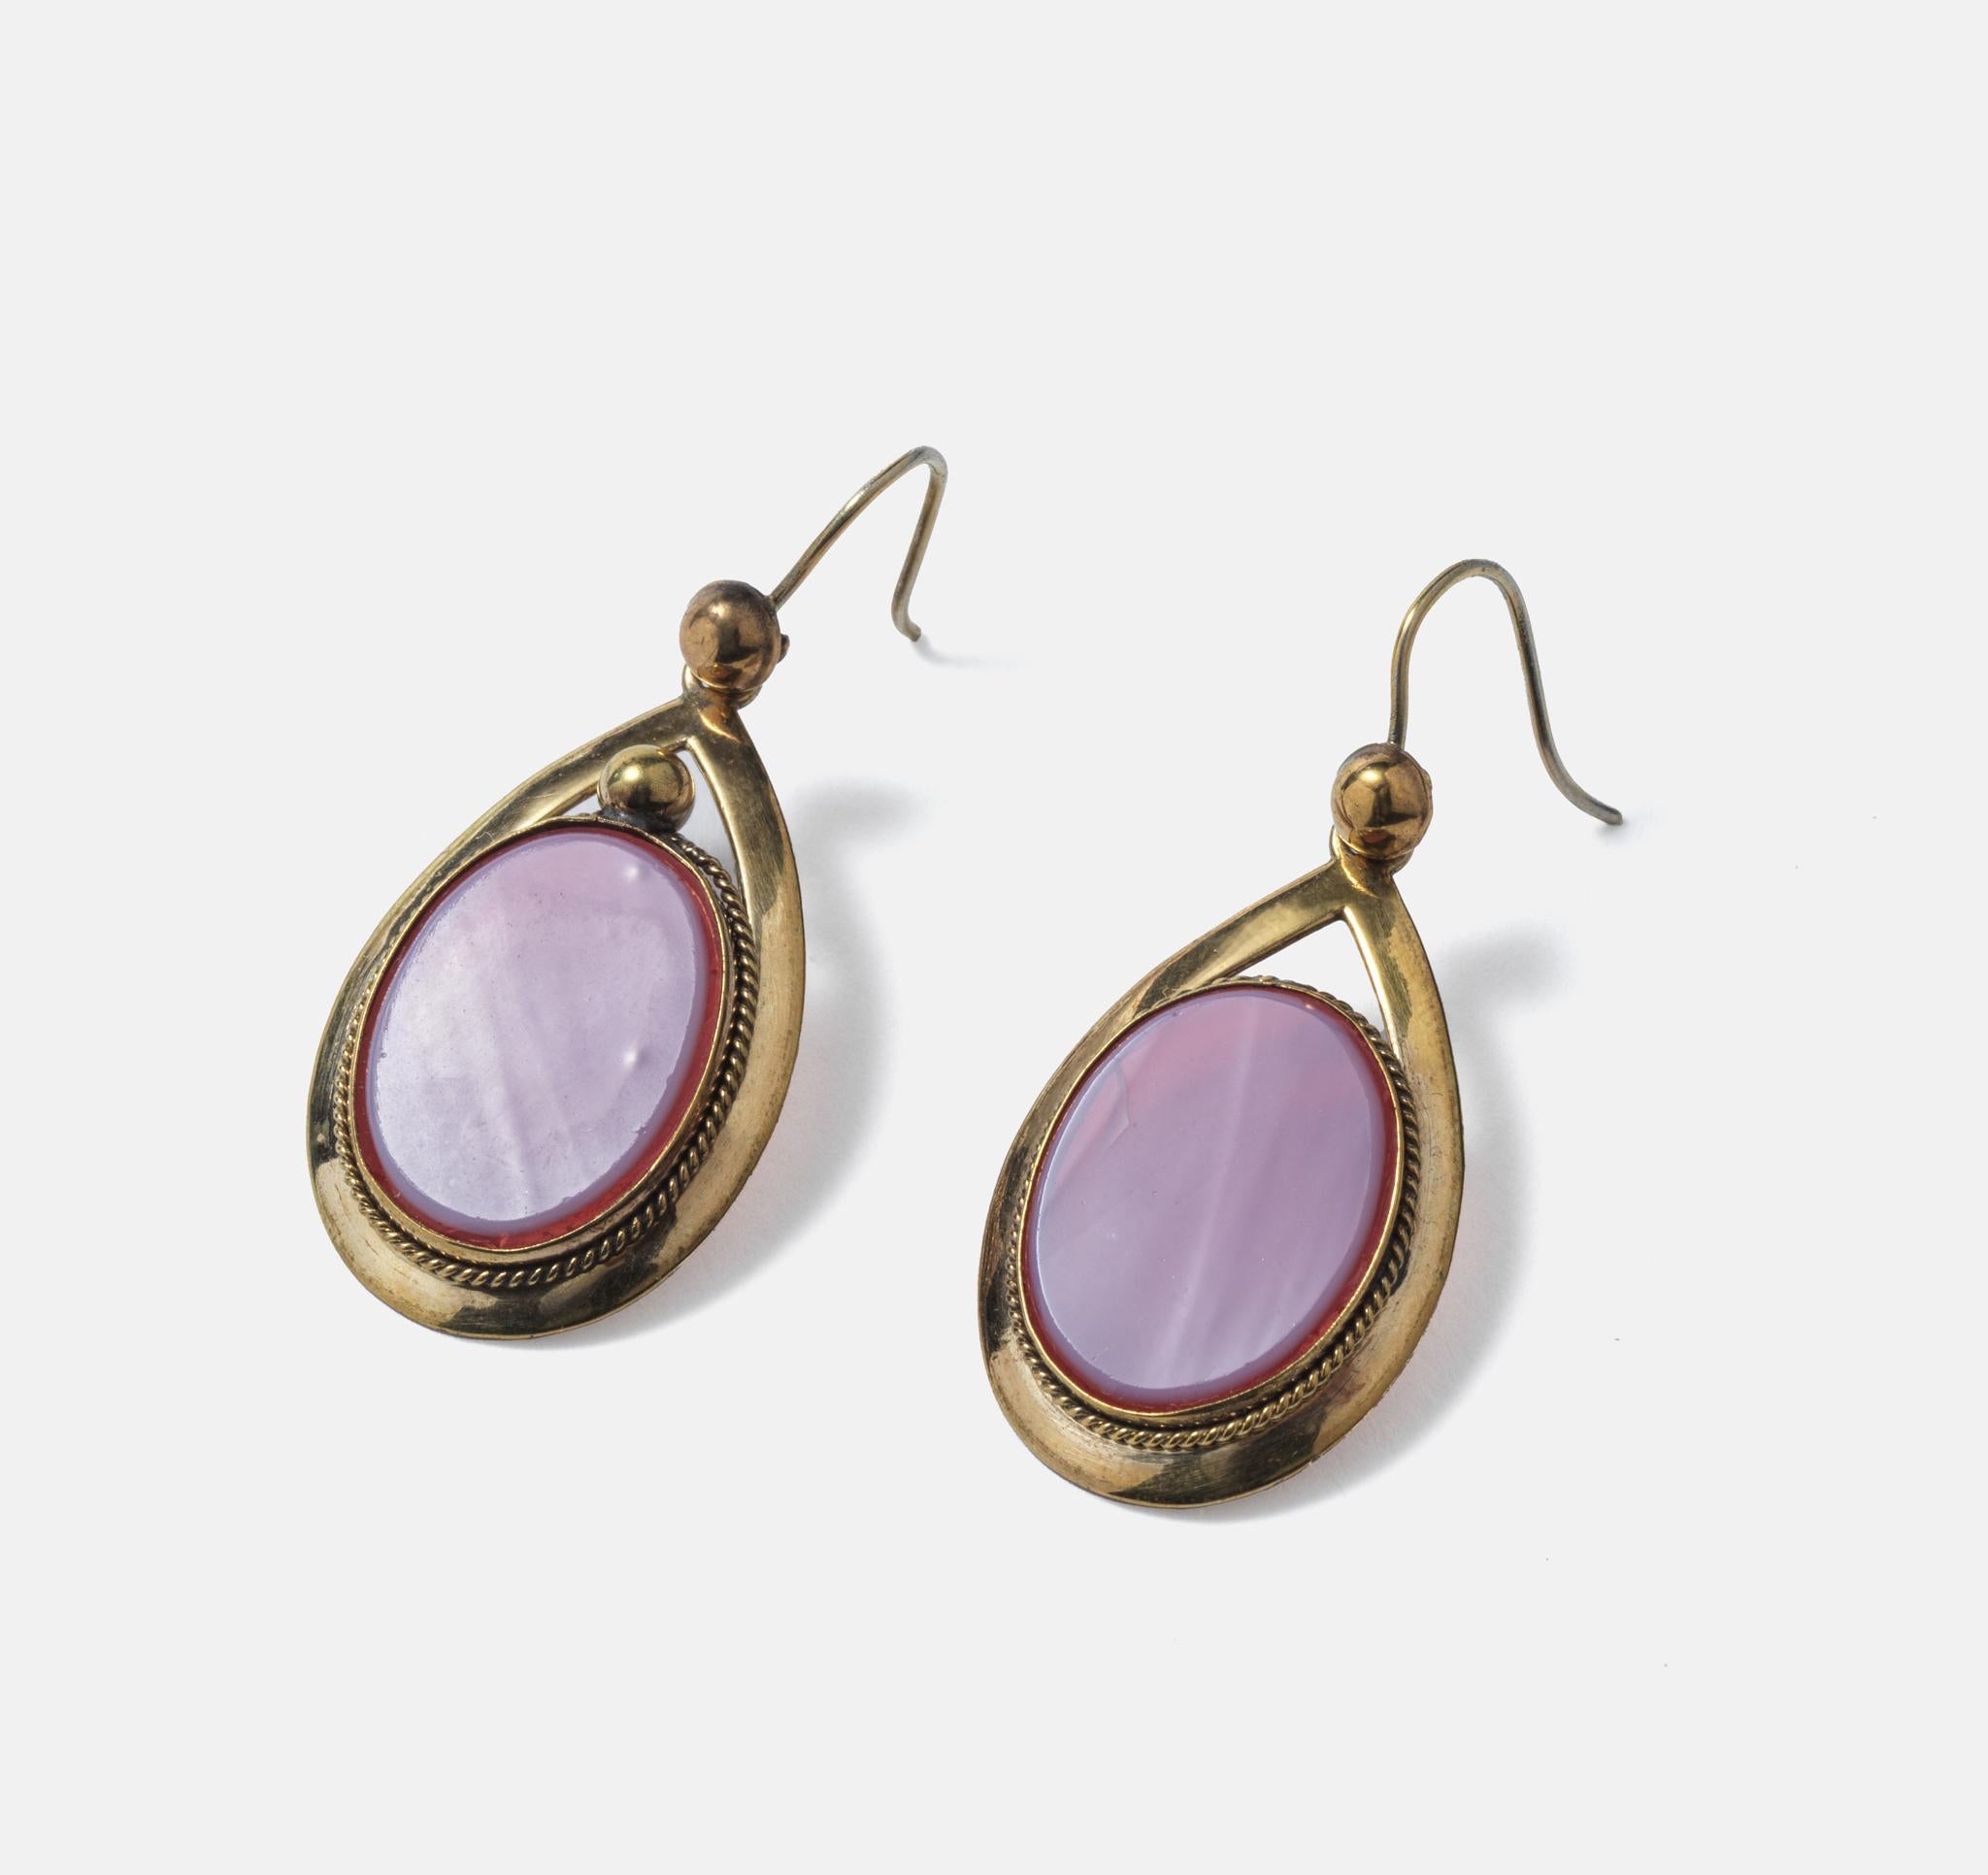 Happy earrings. The metal, tombak, is surrounding pink/purple oval glass pieces. Tombak is a metal alloy made of copper and zink.  It was quite often used in the 19th c to make jewelry.
The handcraft of these earrings is great and the colour of the